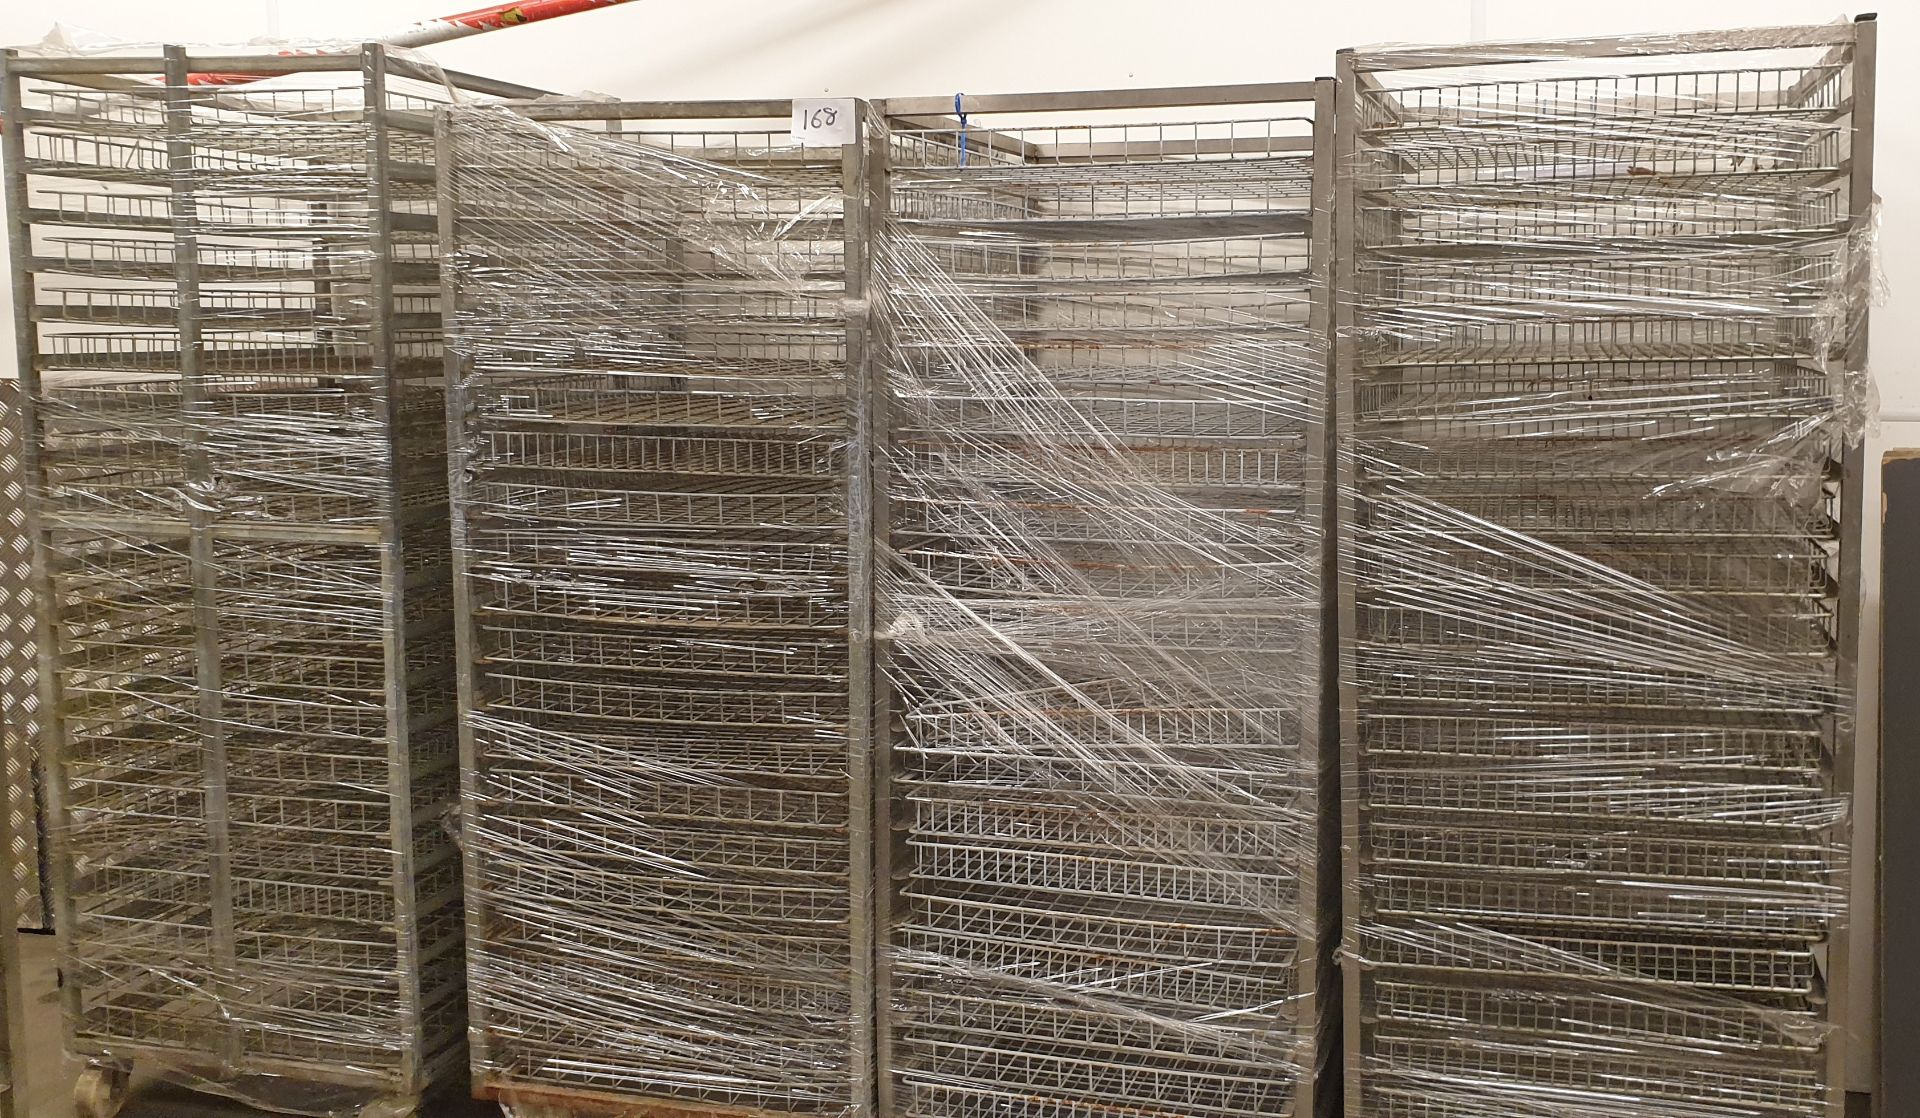 4 x Stainless Steel Mobile Tray Racking Units